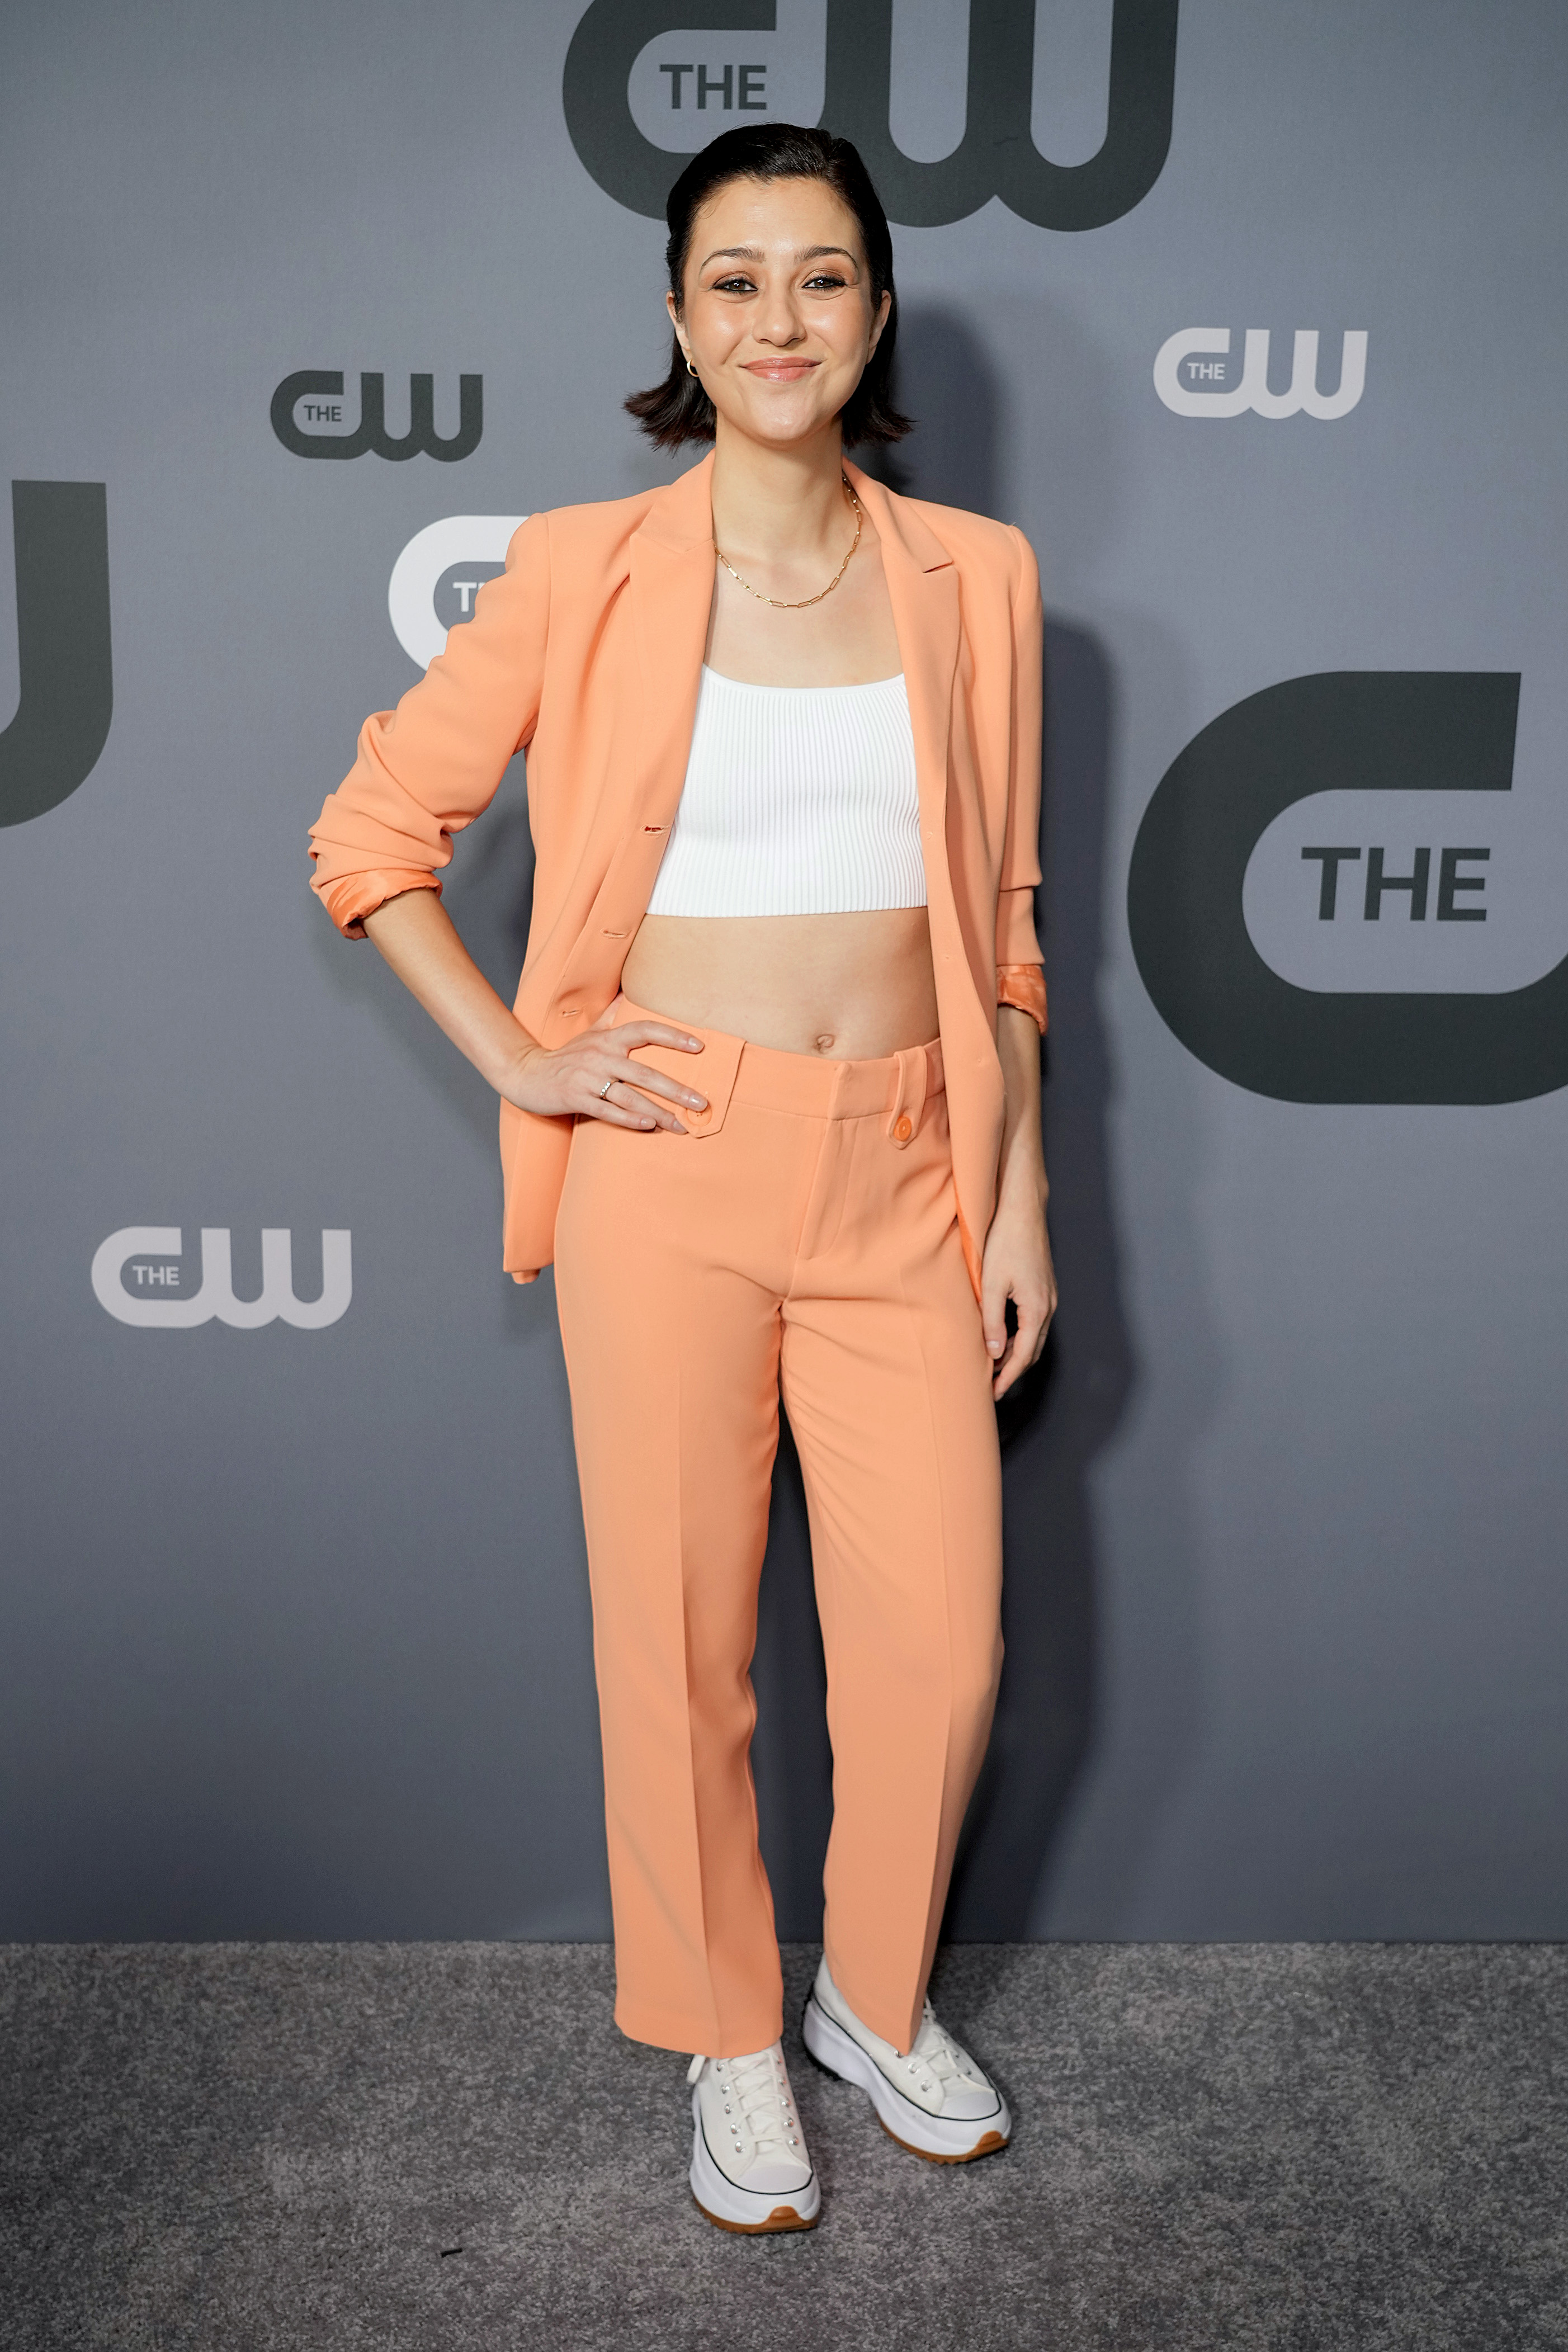 Katie Findlay poses at The CW Network's 2022 Upfront Arrivals at New York City Center on May 19, 2022, in New York City | Source: gety Images